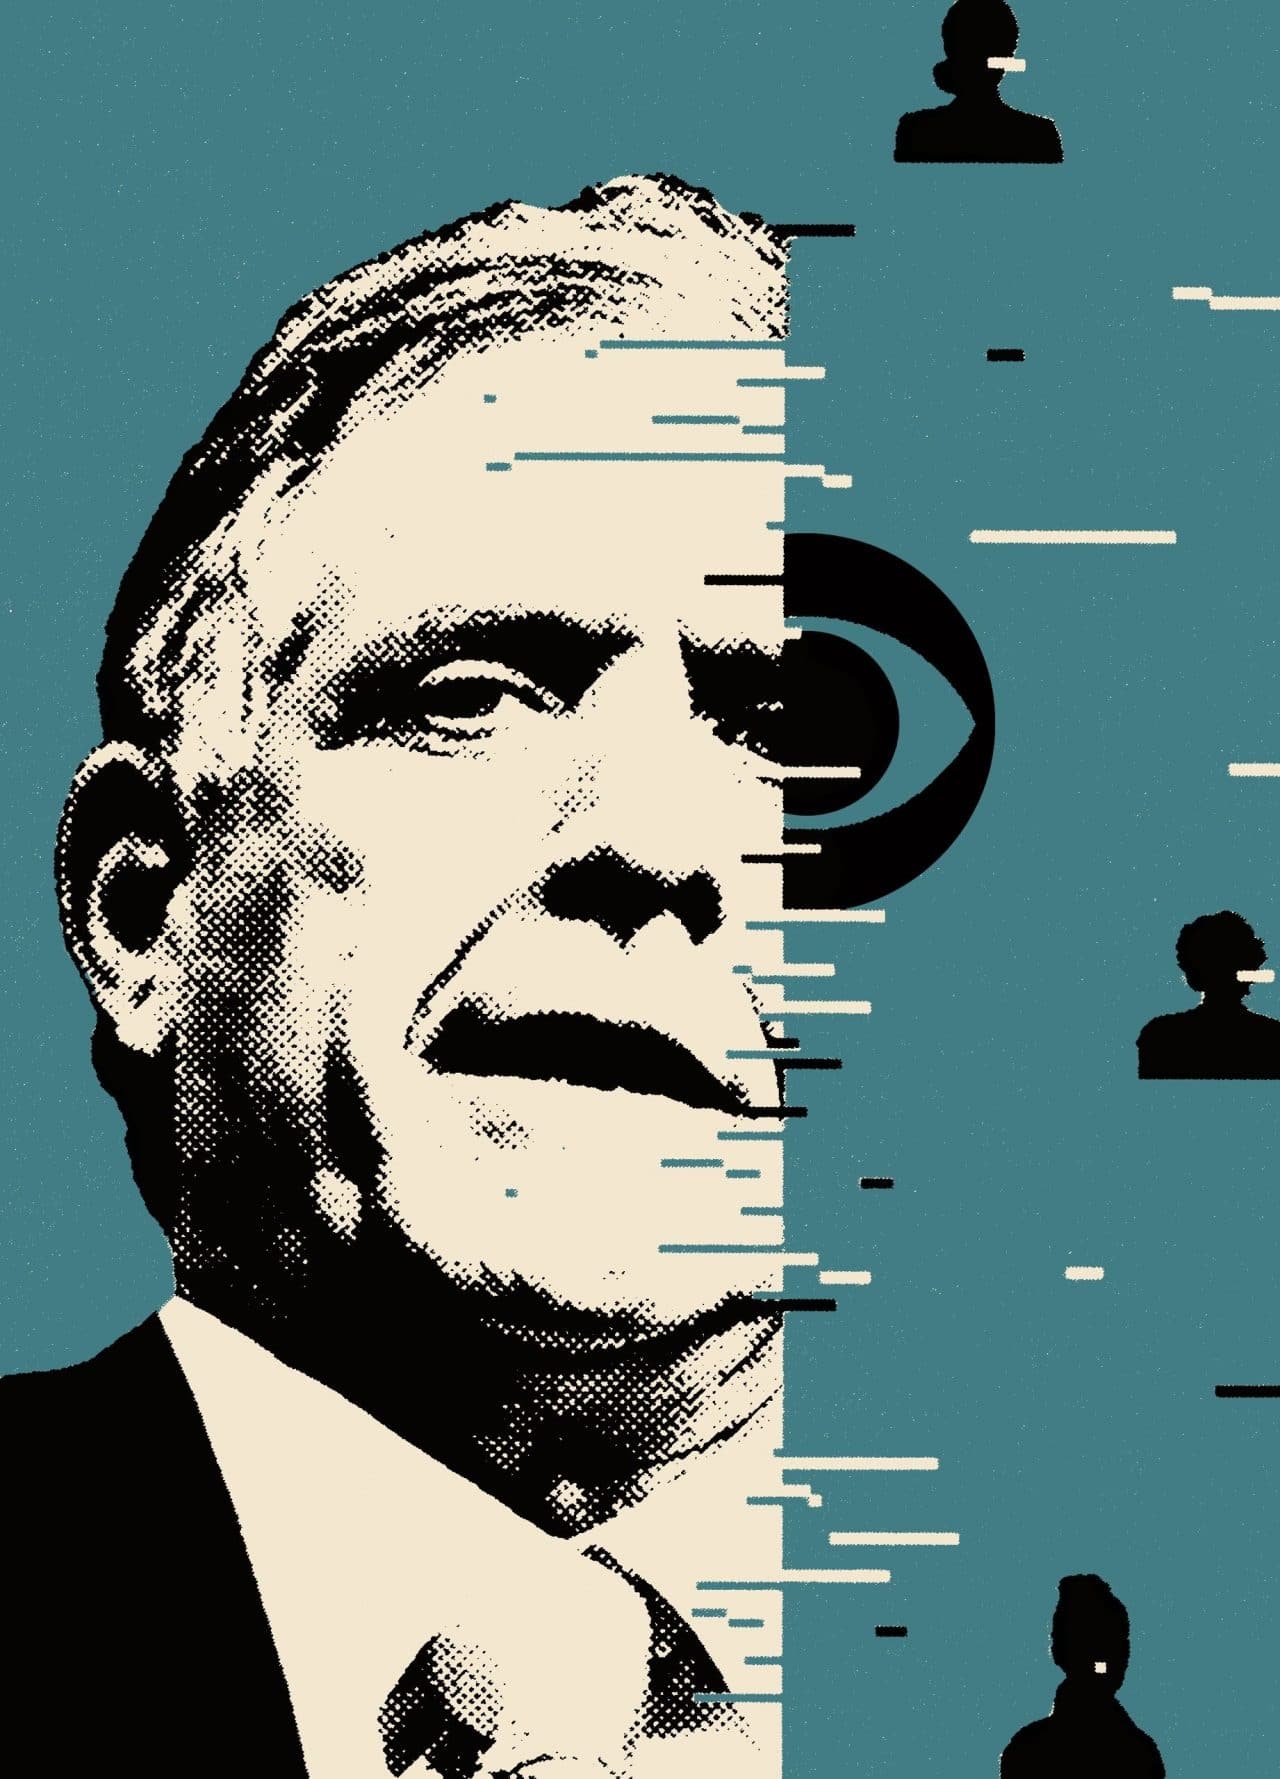 New Yorker Reports: Les Moonves and CBS Face Allegations of Sexual Misconduct